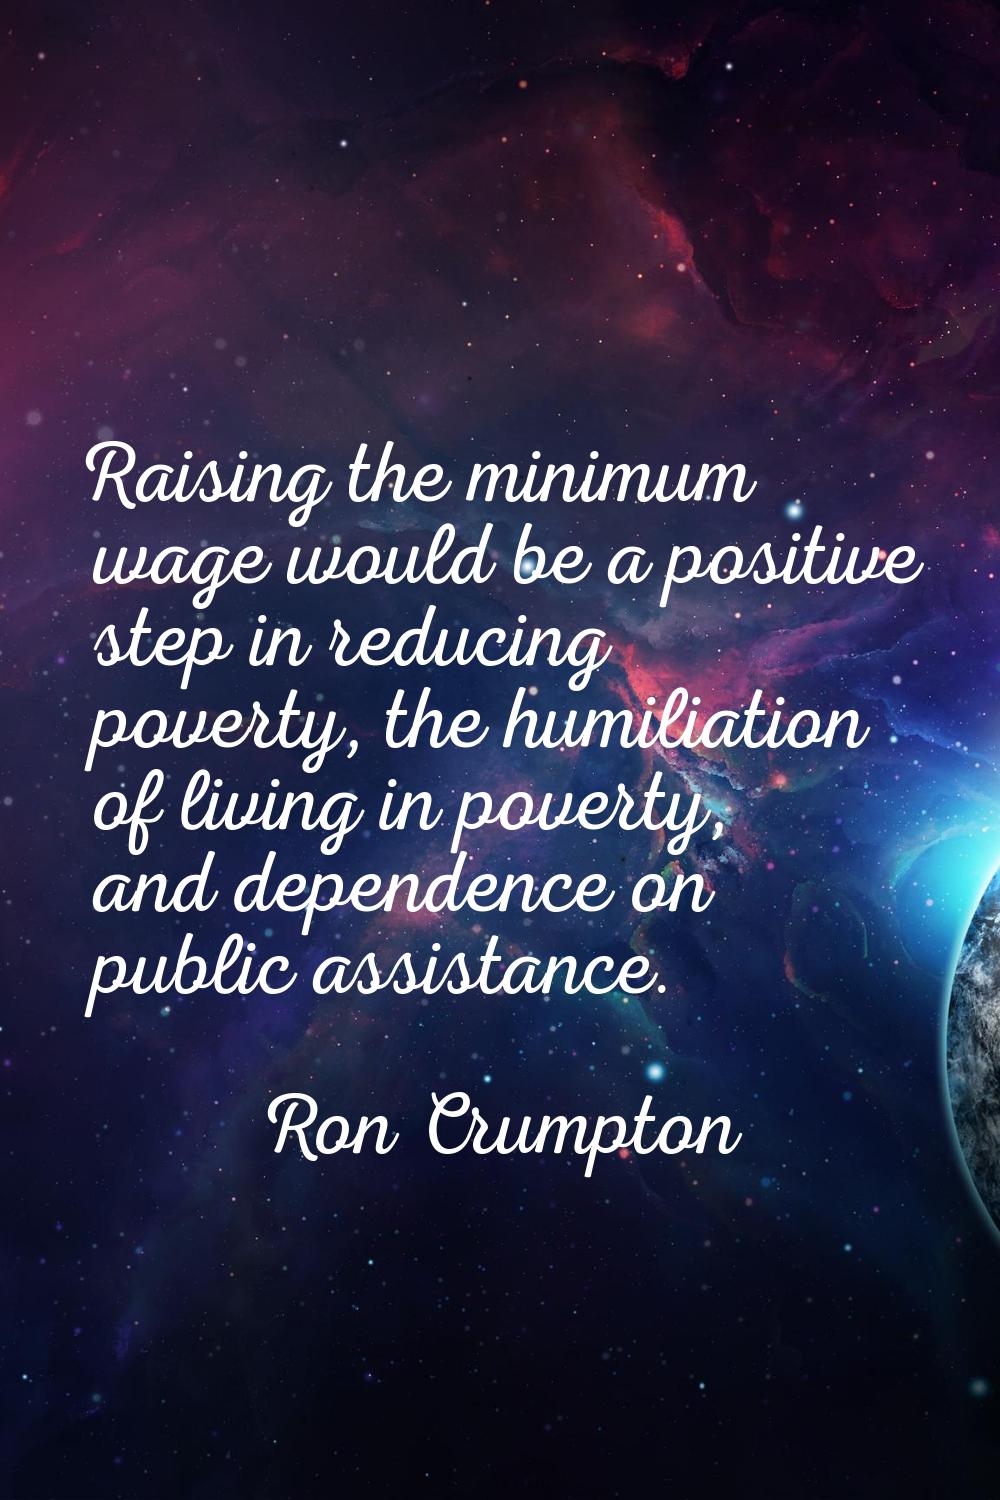 Raising the minimum wage would be a positive step in reducing poverty, the humiliation of living in